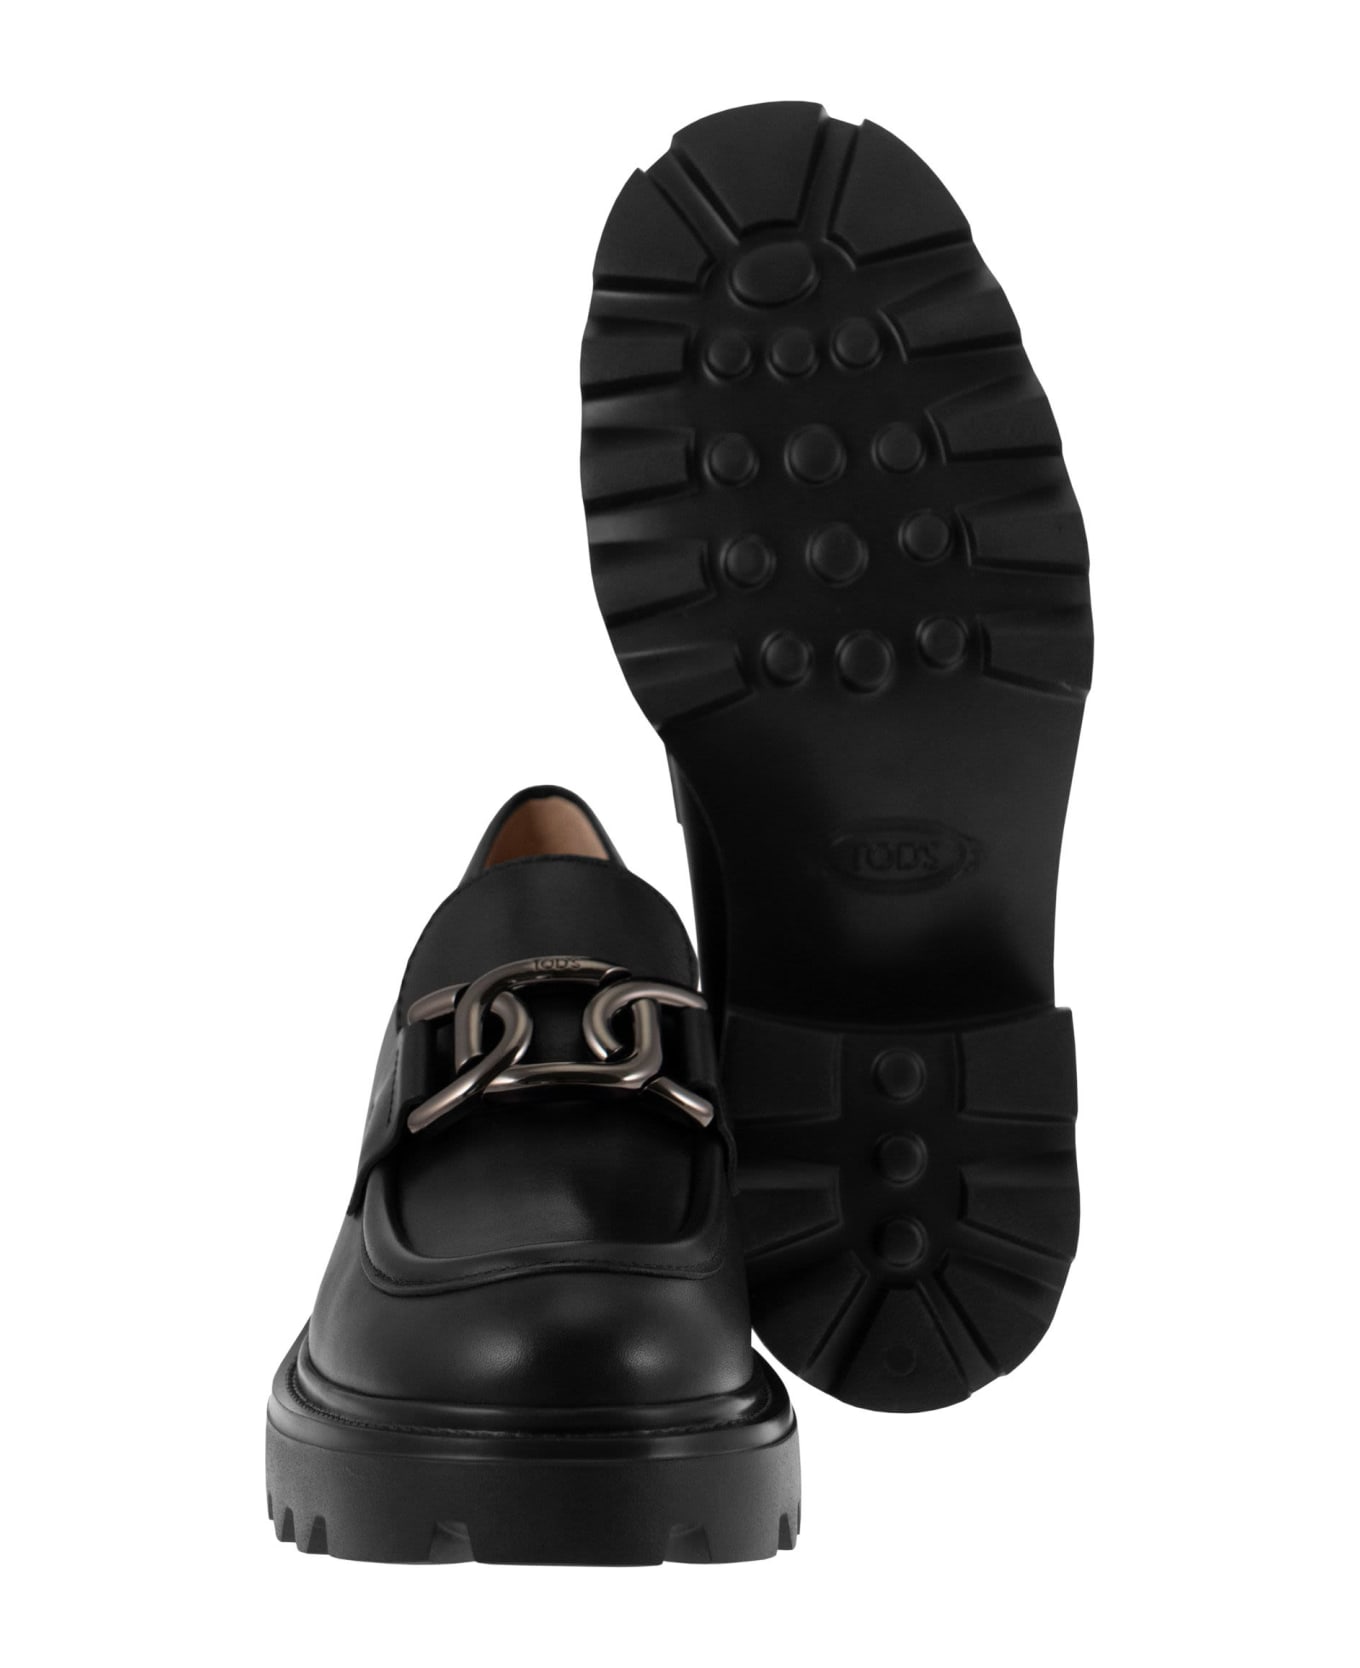 Tod's High Leather Loafer - Black